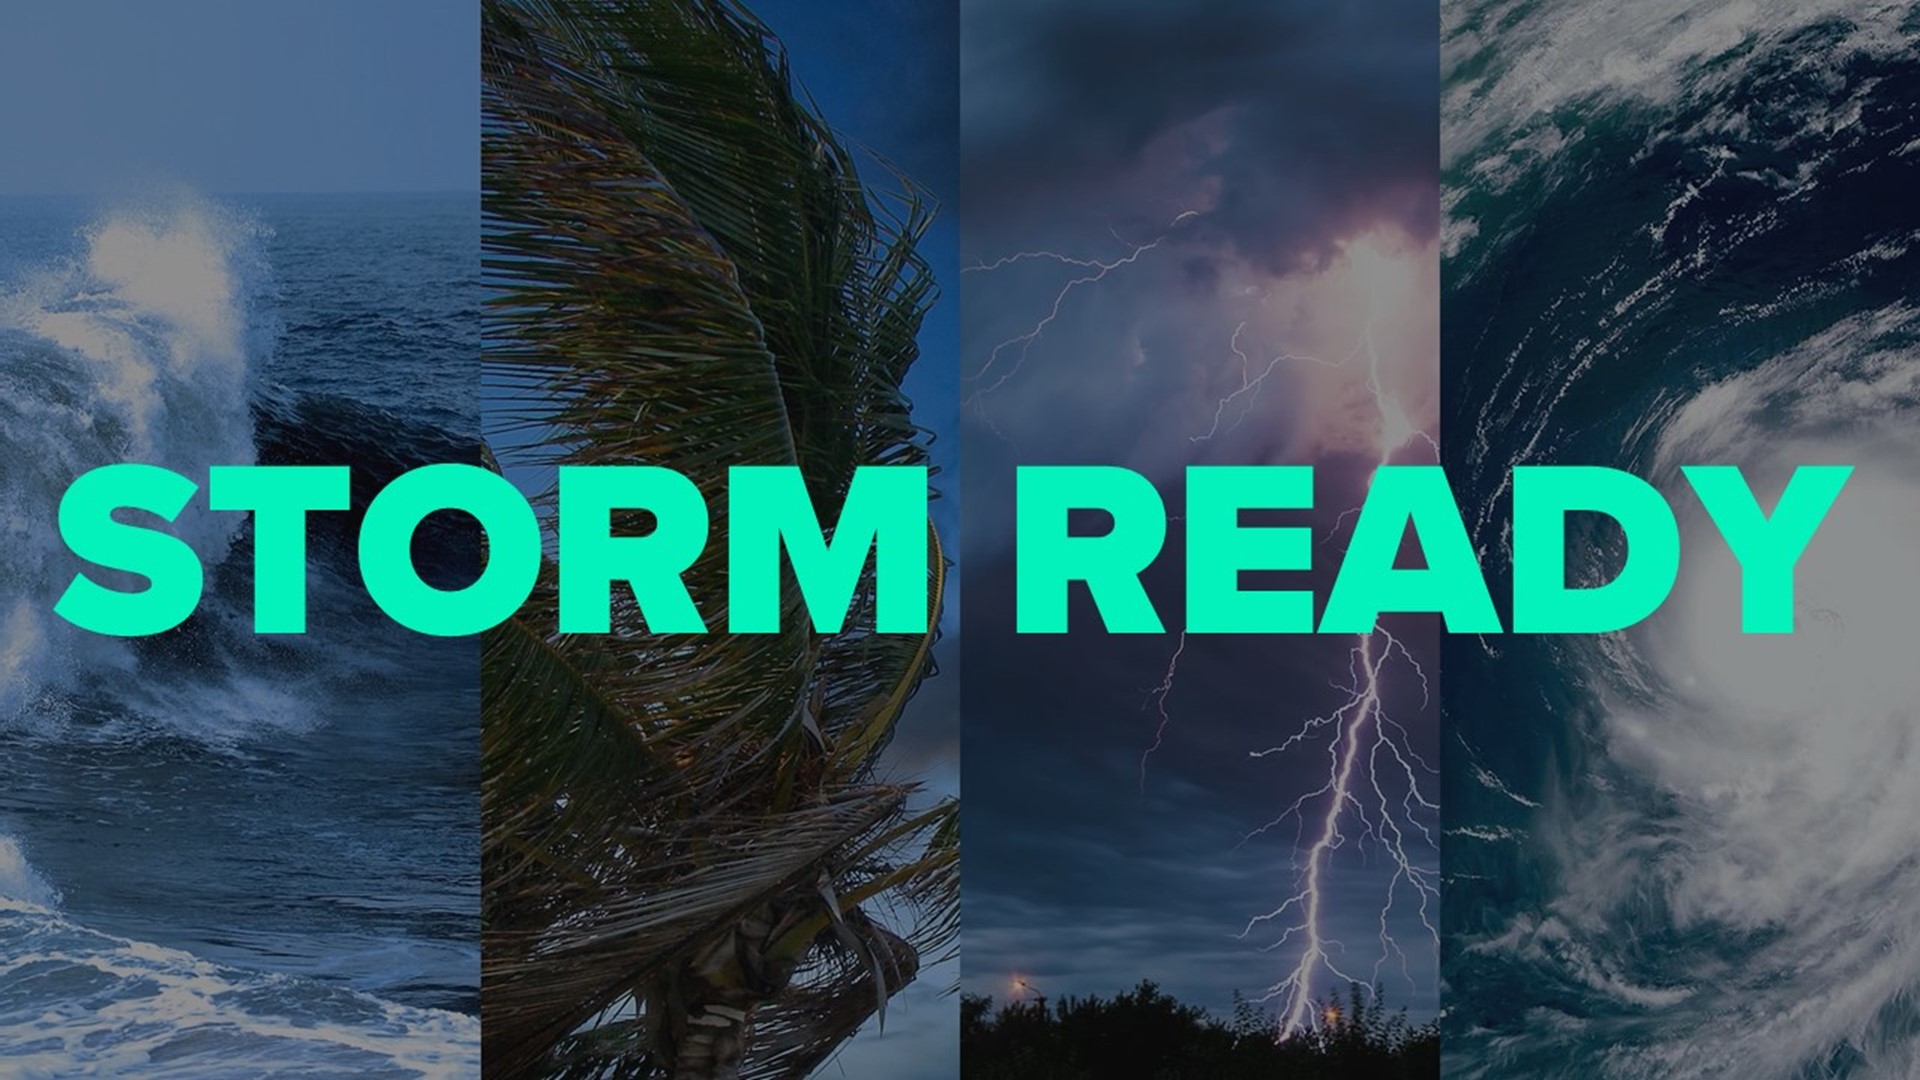 10 Tampa Bay has what you need to know to be prepared and safe during the 2023 Atlantic hurricane season.